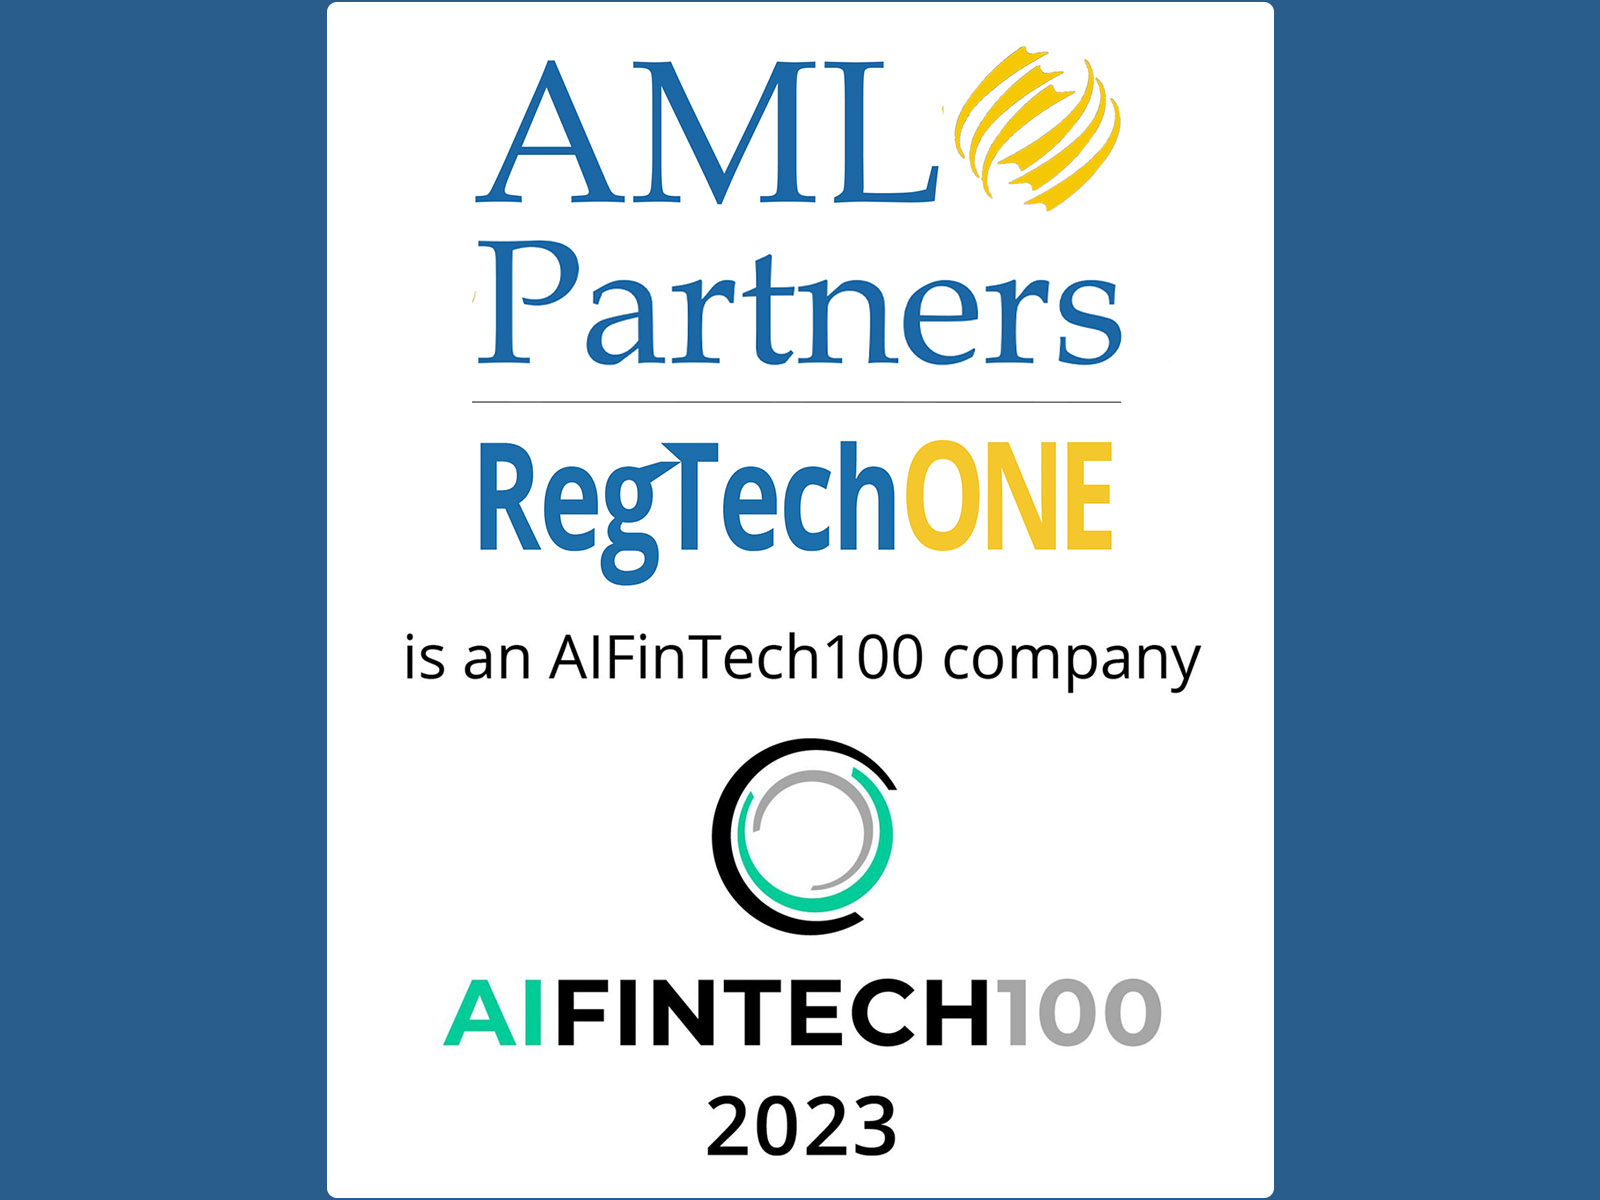 This image shows a blue rectangle on which is centered the logo of AML Partners and its RegTechONE platform for AML software and KYC software. And there is text announcing AML Partners as an AIFinTech100 company for its AI and ML functionality.